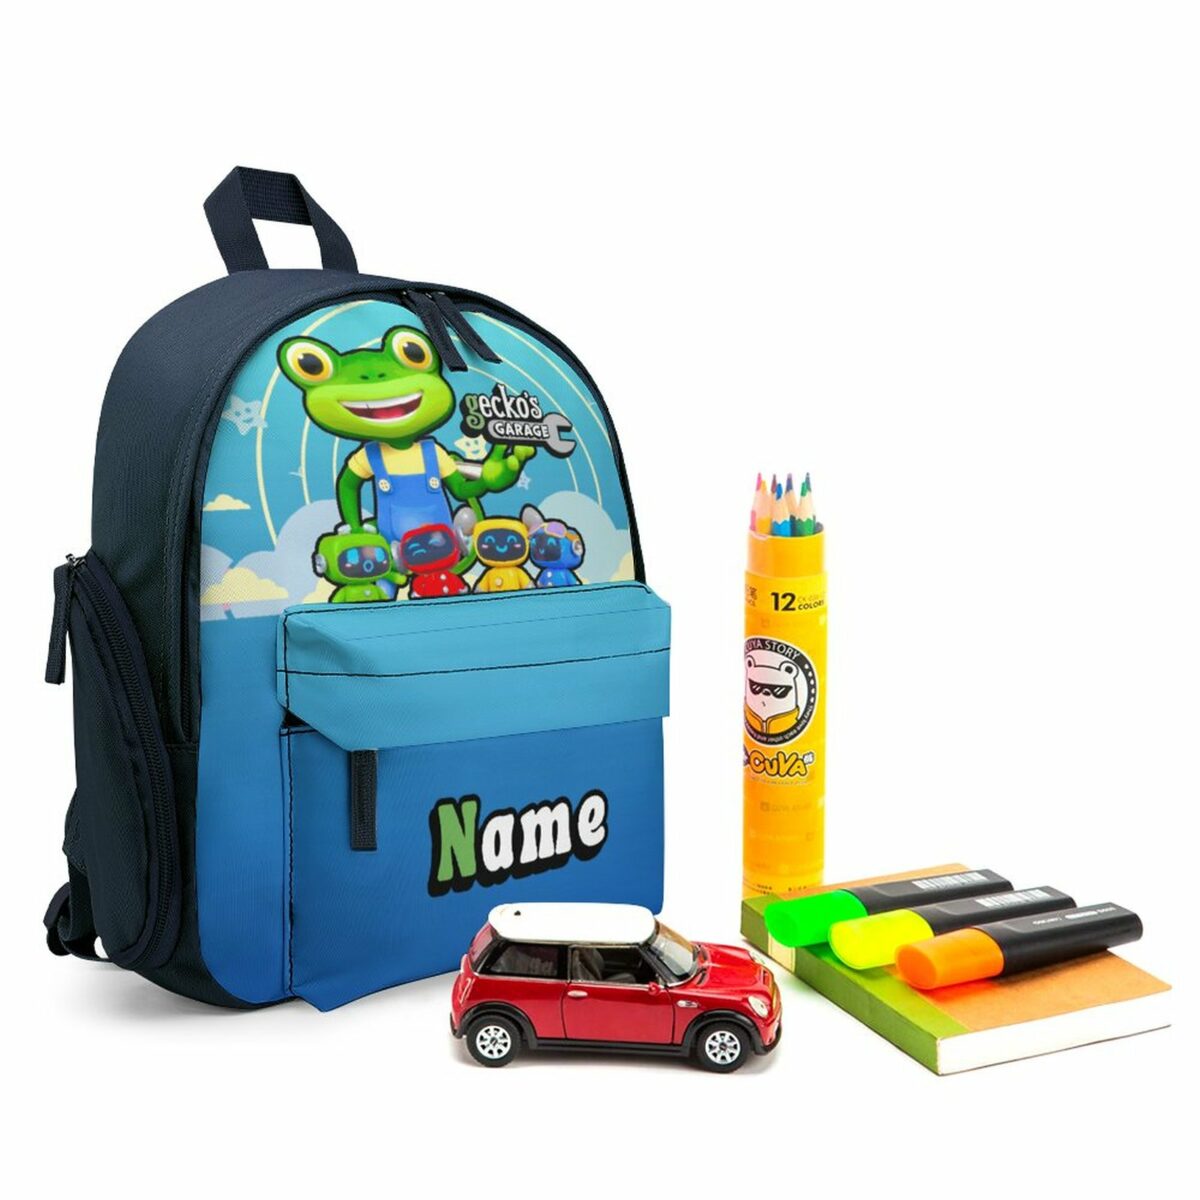 Personalized Gecko’s Garage Characters Blue Children’s School Bag – Toddler’s Backpack Cool Kiddo 14